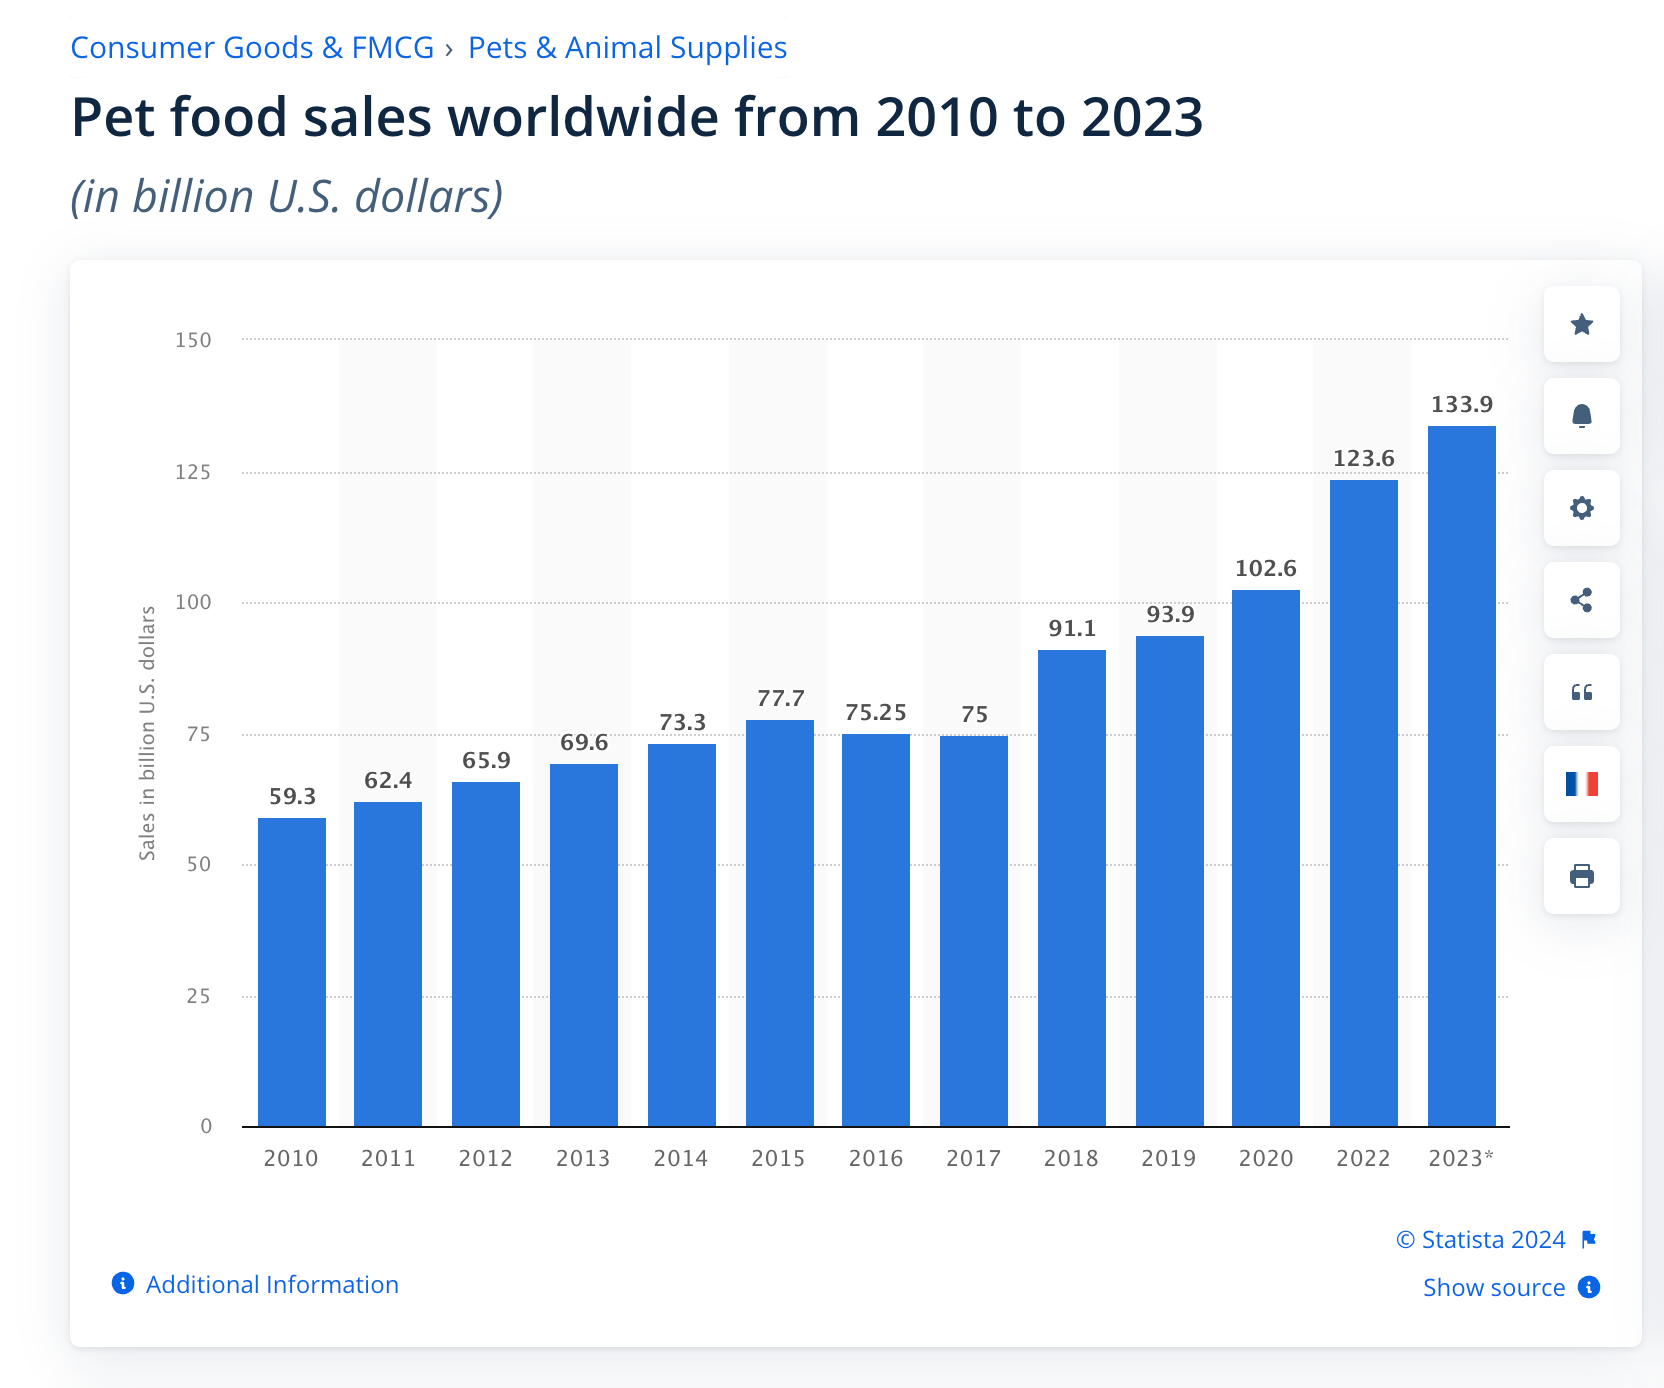 A graph showing retail sales of pet food over time